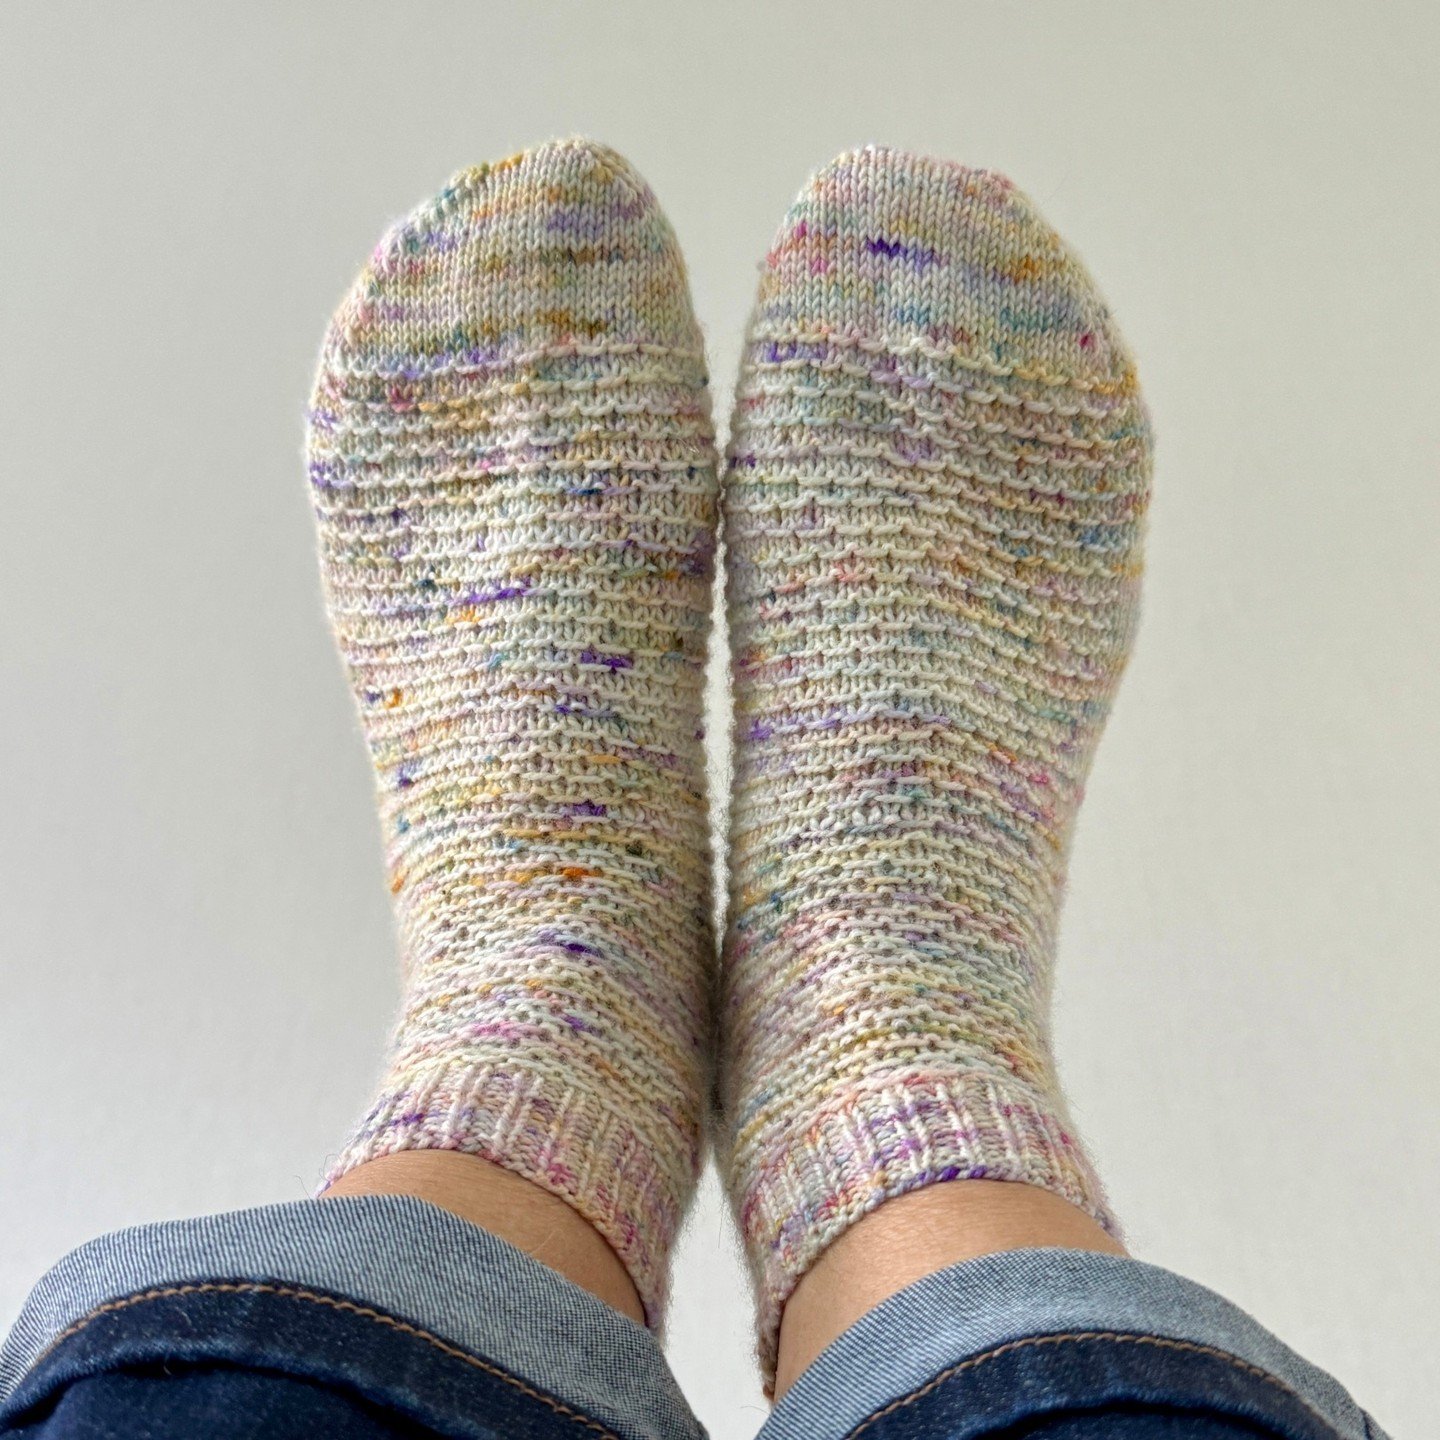 NEW - COASTAL SOCKS 🐚

A new pair of socks! 

This design is the perfect vacation or carry-along project, calling for less than one skein of fingering-weight (sock) yarn.

If you prefer mid-calf socks, no worries. Length of leg and feet are easy adj